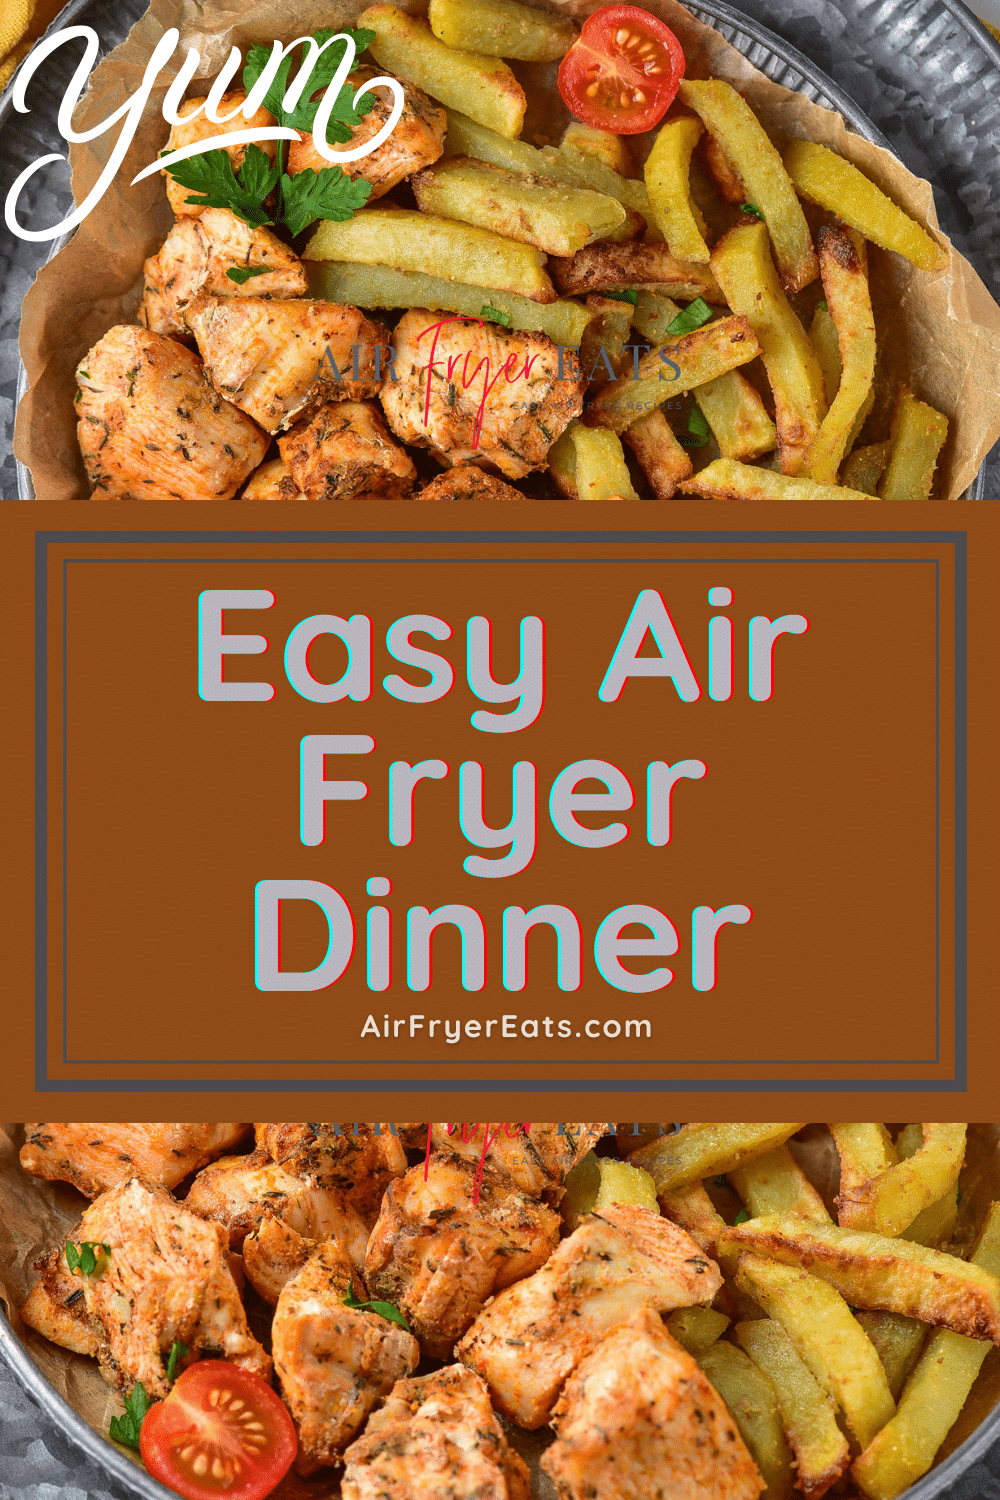 photos of chicken, potatoes, and cherry tomatoes. Text box overlay says "easy air fryer dinner" via @vegetarianmamma